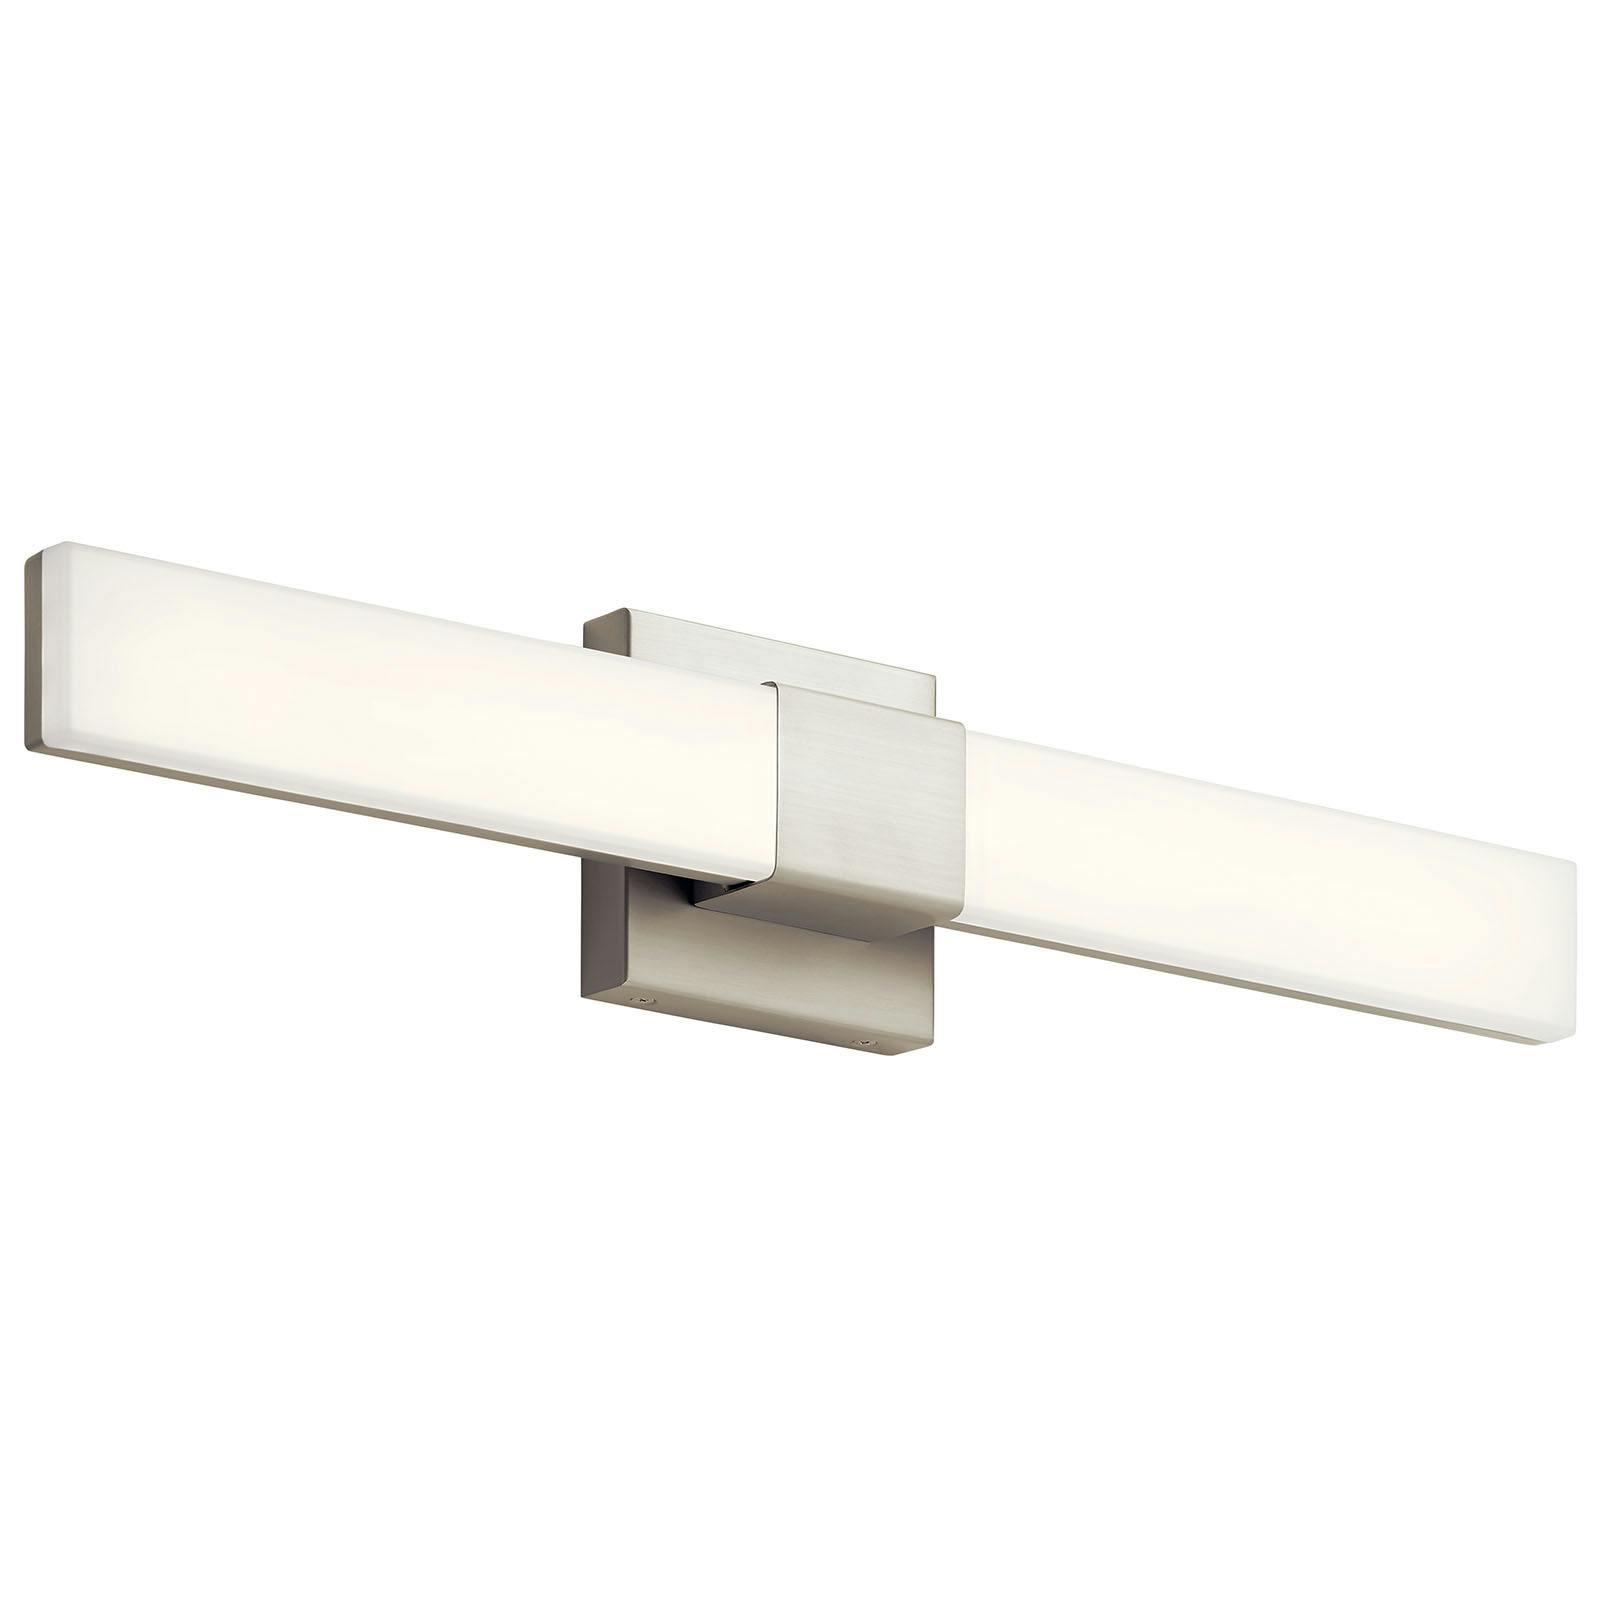 Neltev 24" LED Wall Sconce Satin Nickel on a white background